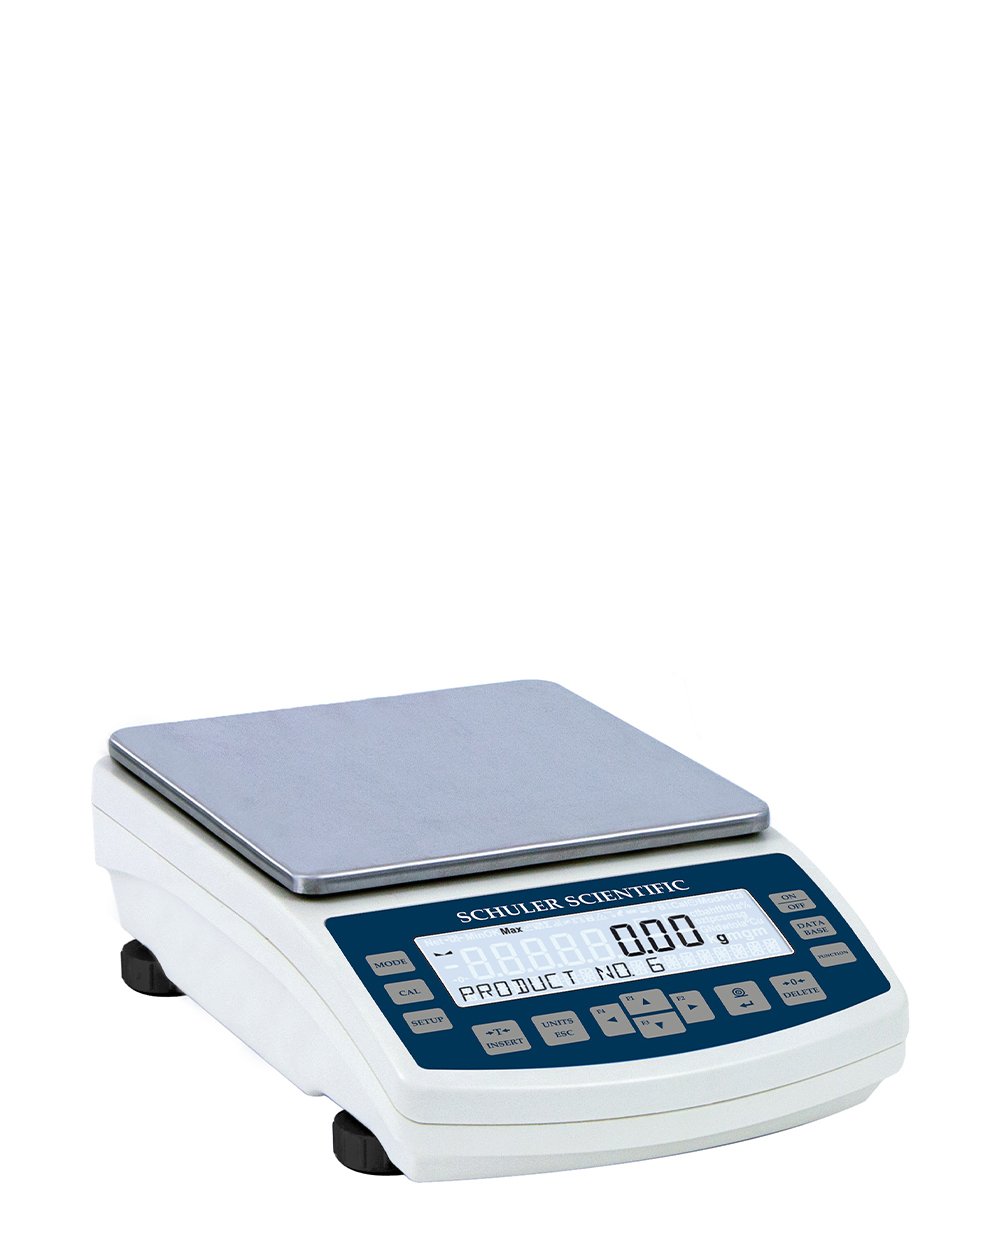 Digital Weed Scales & Counters for Cannabis Measurements